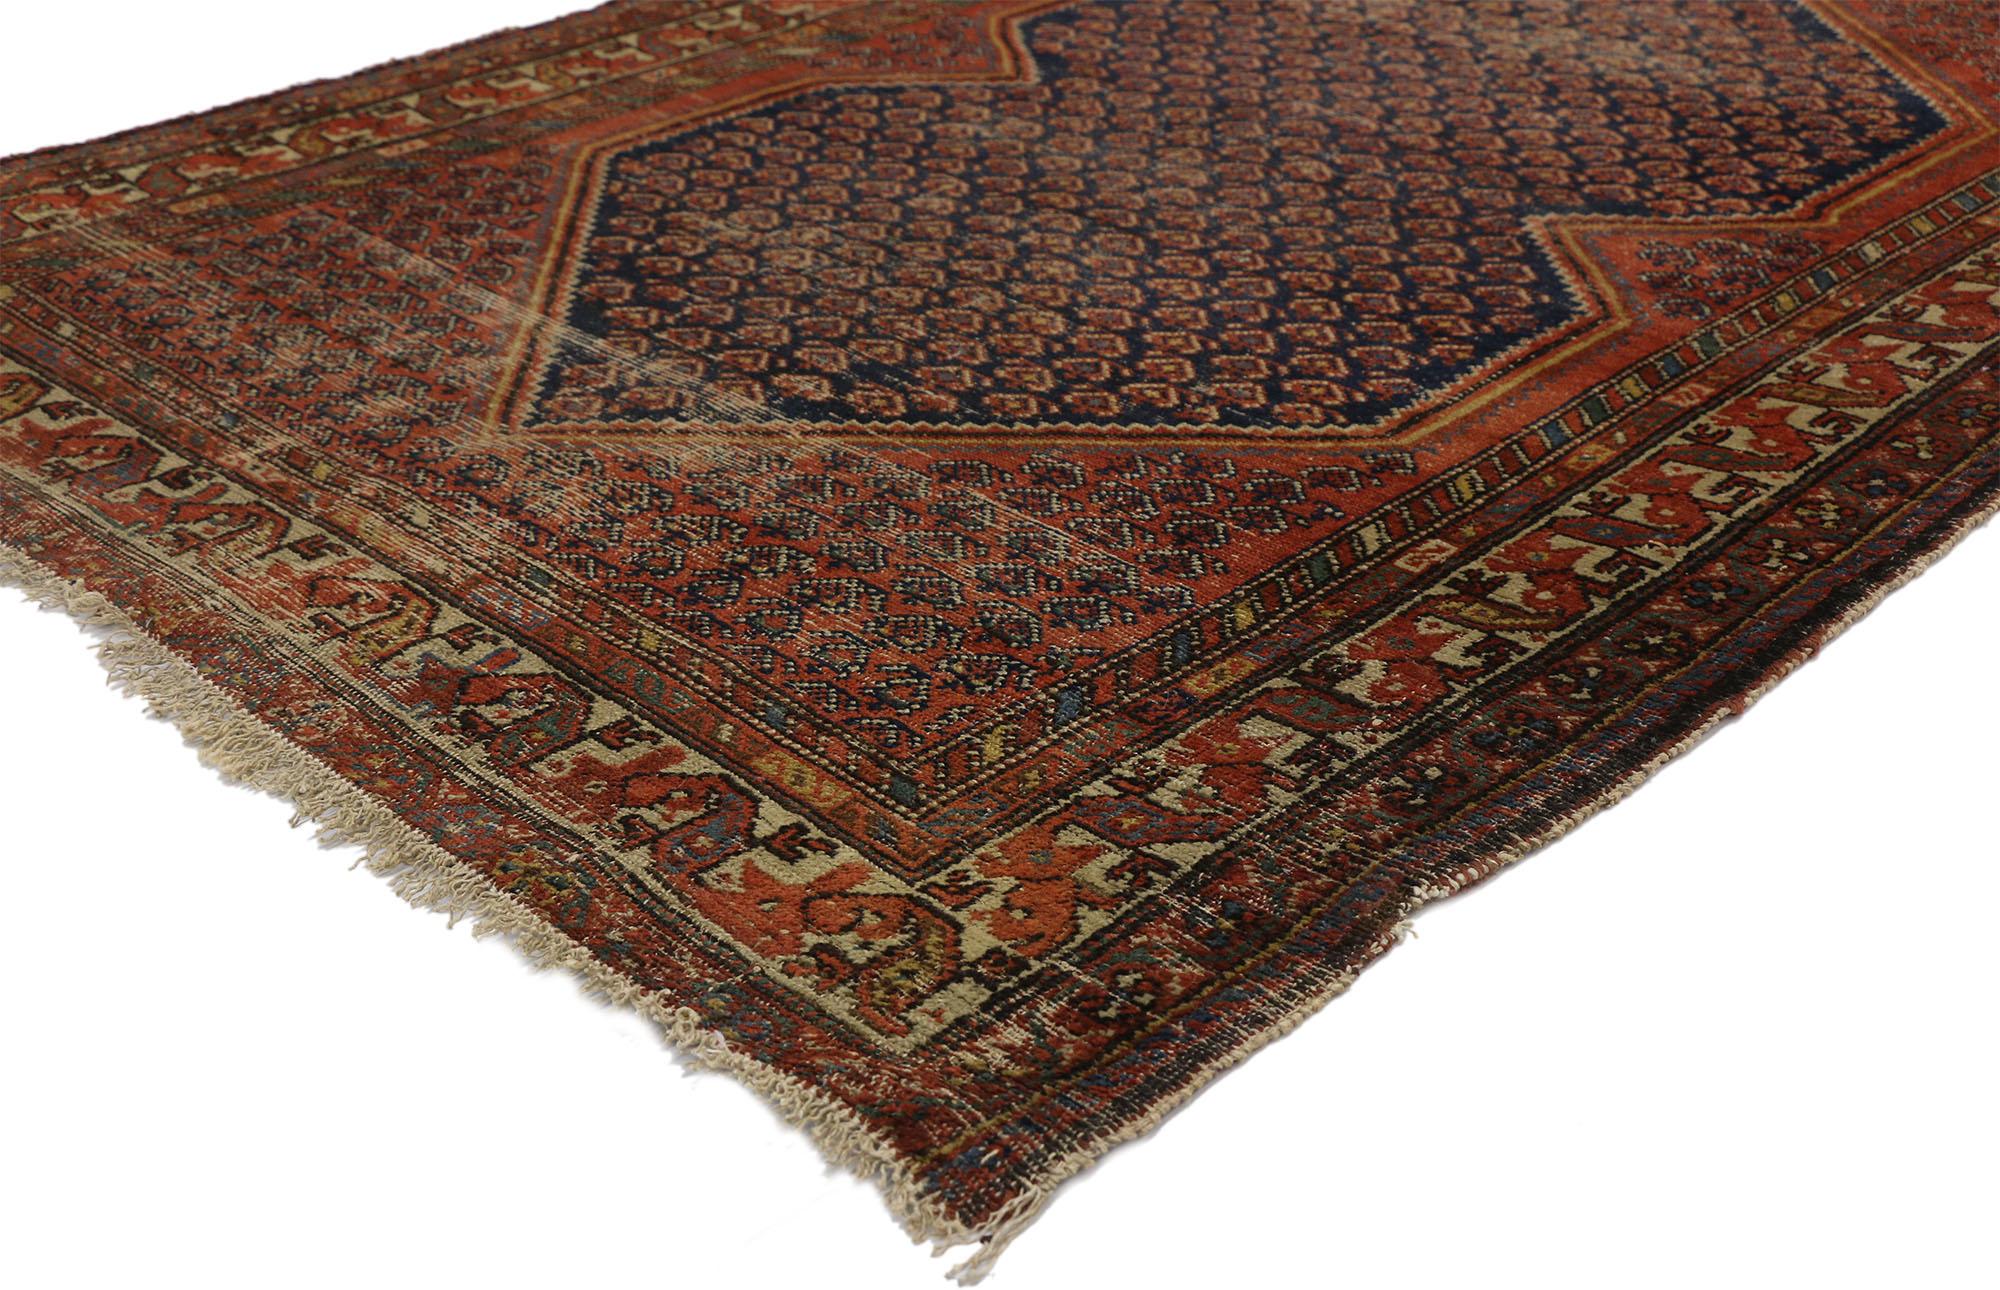 77251 distressed antique Persian Malayer rug with Rustic Artisan and Industrial style. With architectural elements combined with a weathered composition, this hand knotted wool antique Persian rug embodies a rustic Artisan style with MCM vibes. This